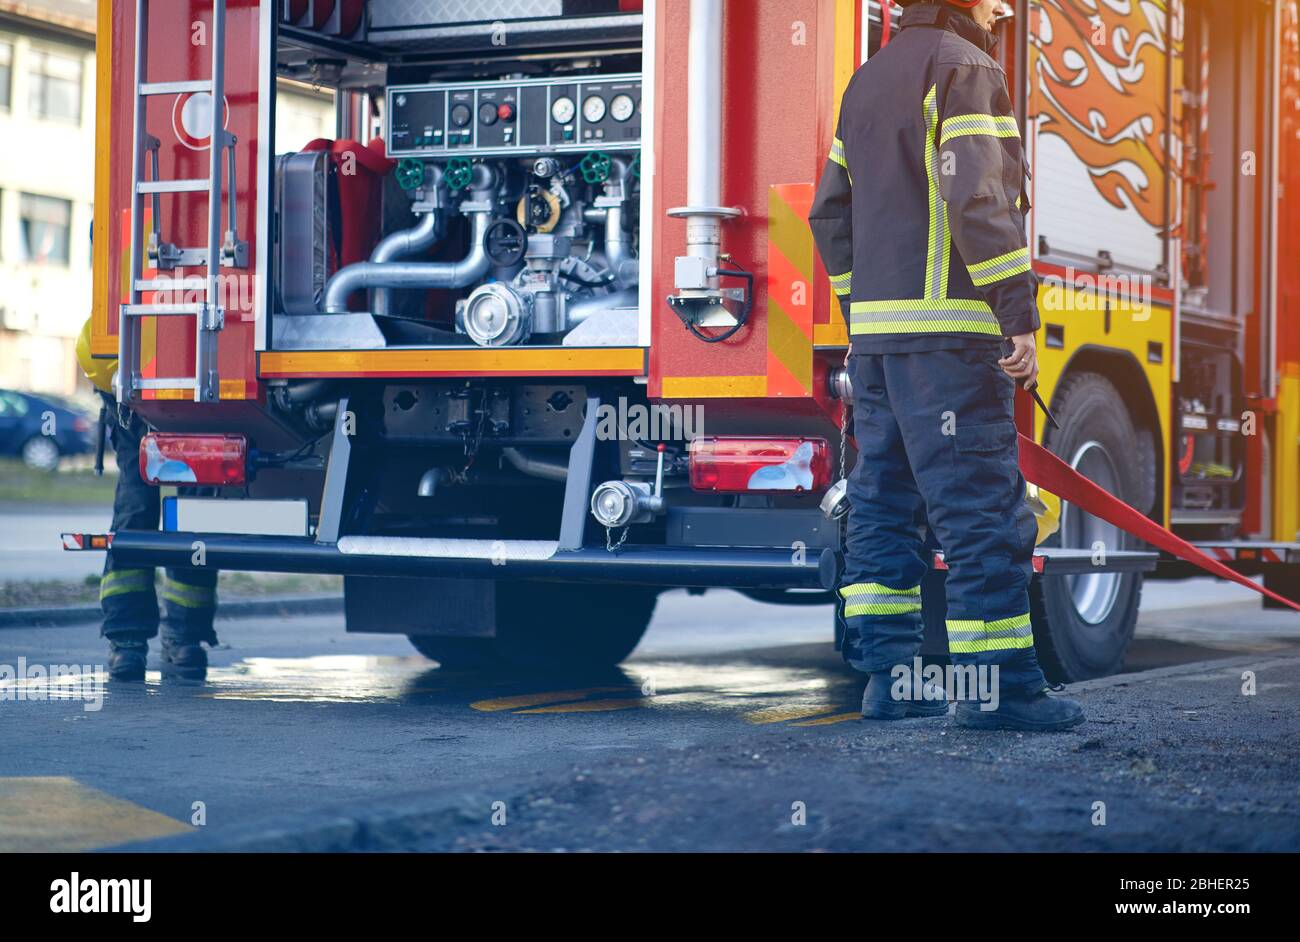 Firefighter pumper truck. Profesional Fire truck with fire fighting equipment. Stock Photo